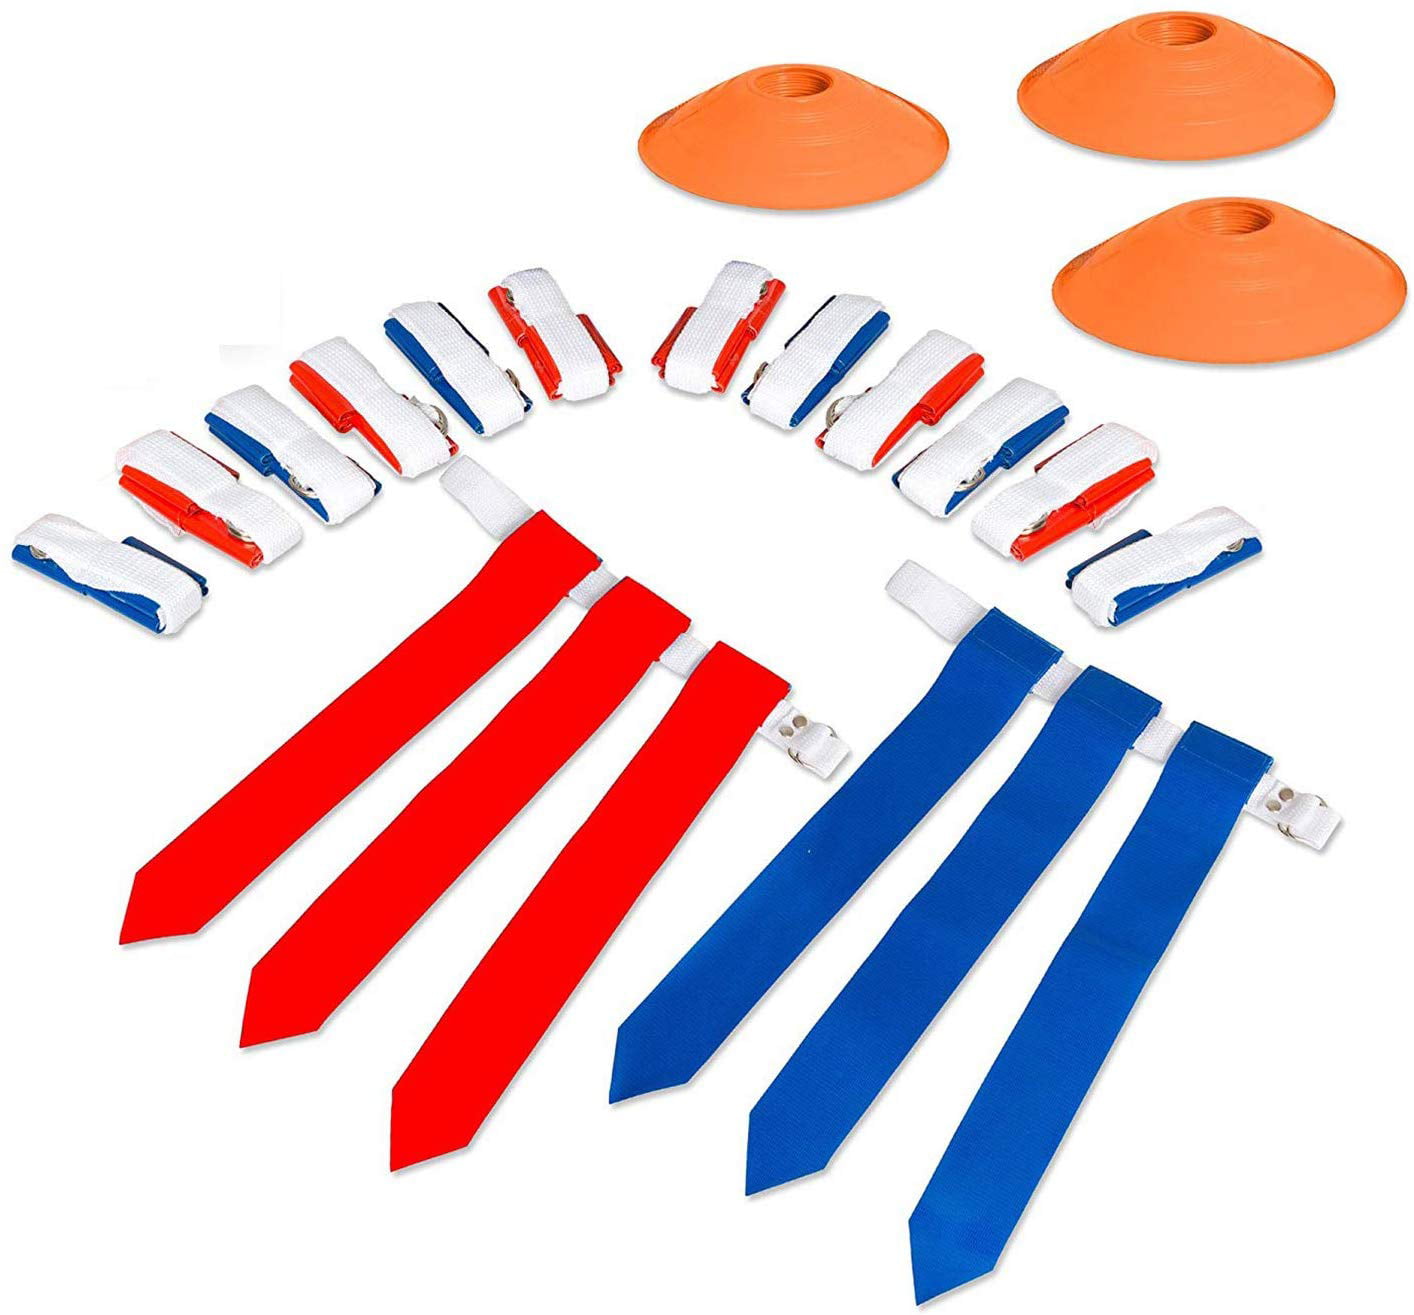 14 Belts 42 Flags 14 Player Flag Football Deluxe Set 12 Cones & 1 Mesh Bag